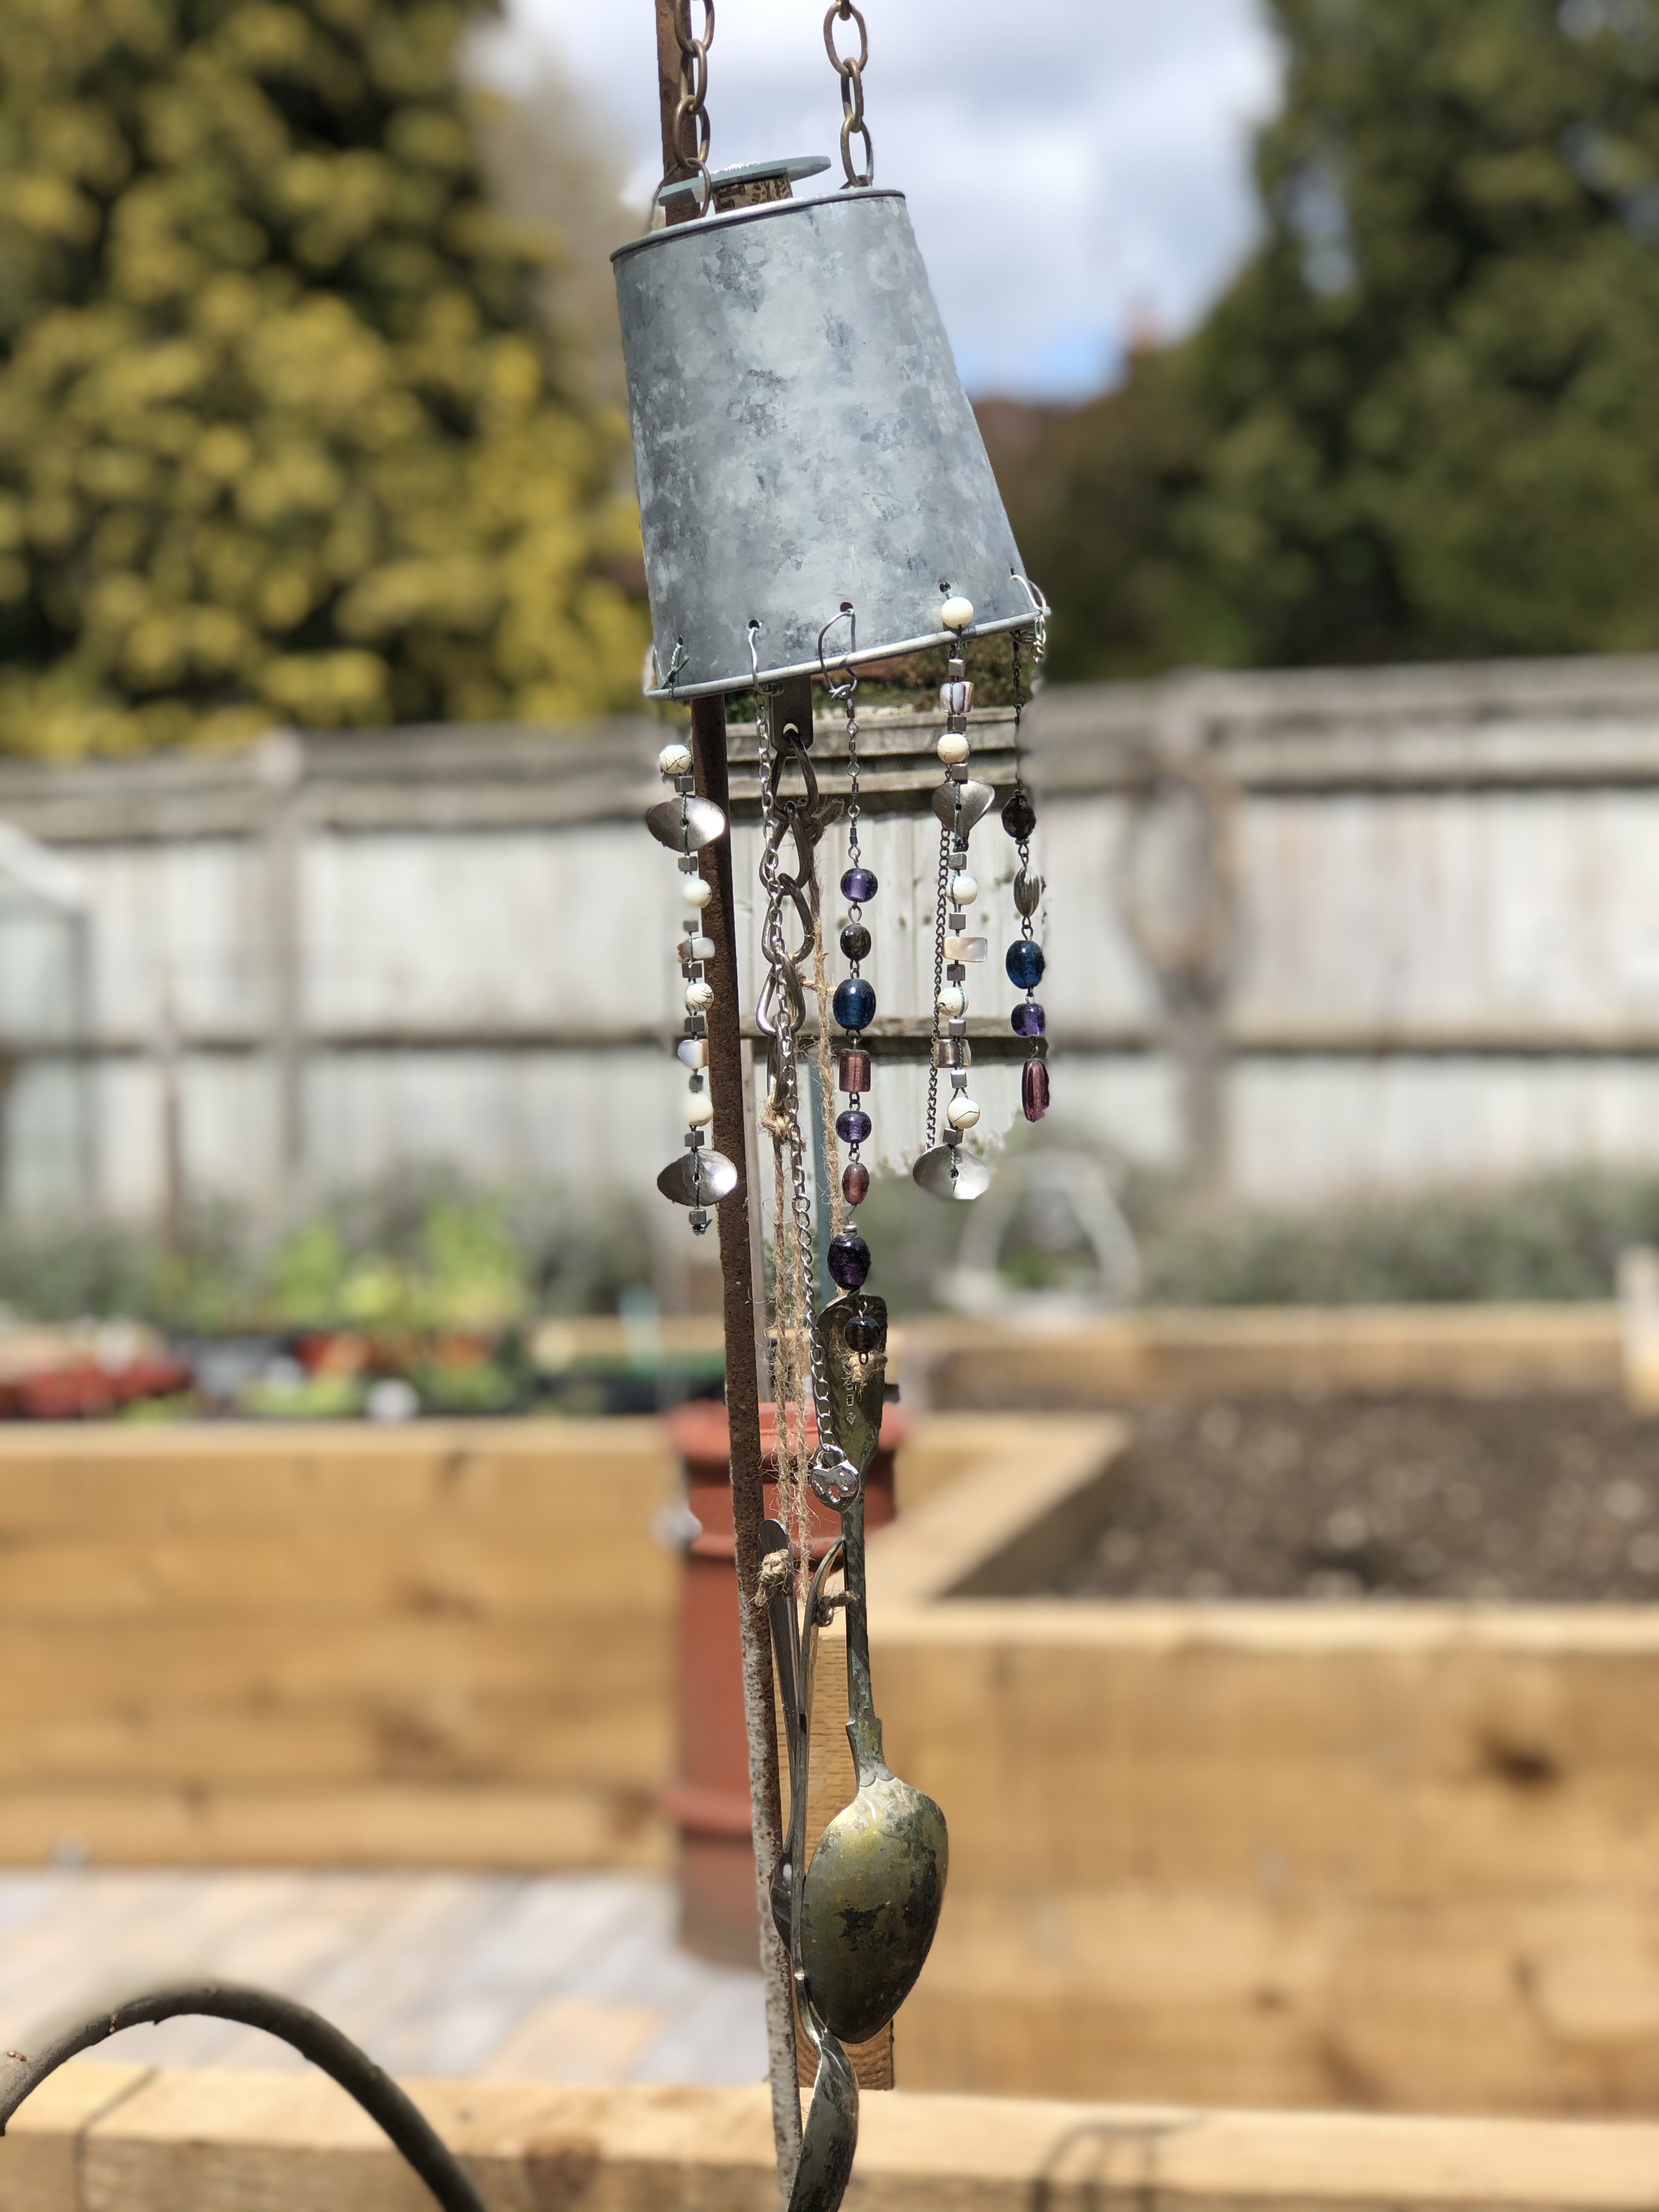 Wind Chimes in situ 1 - How to make a DIY Bird Scarer - or is it a recycled wind chime...